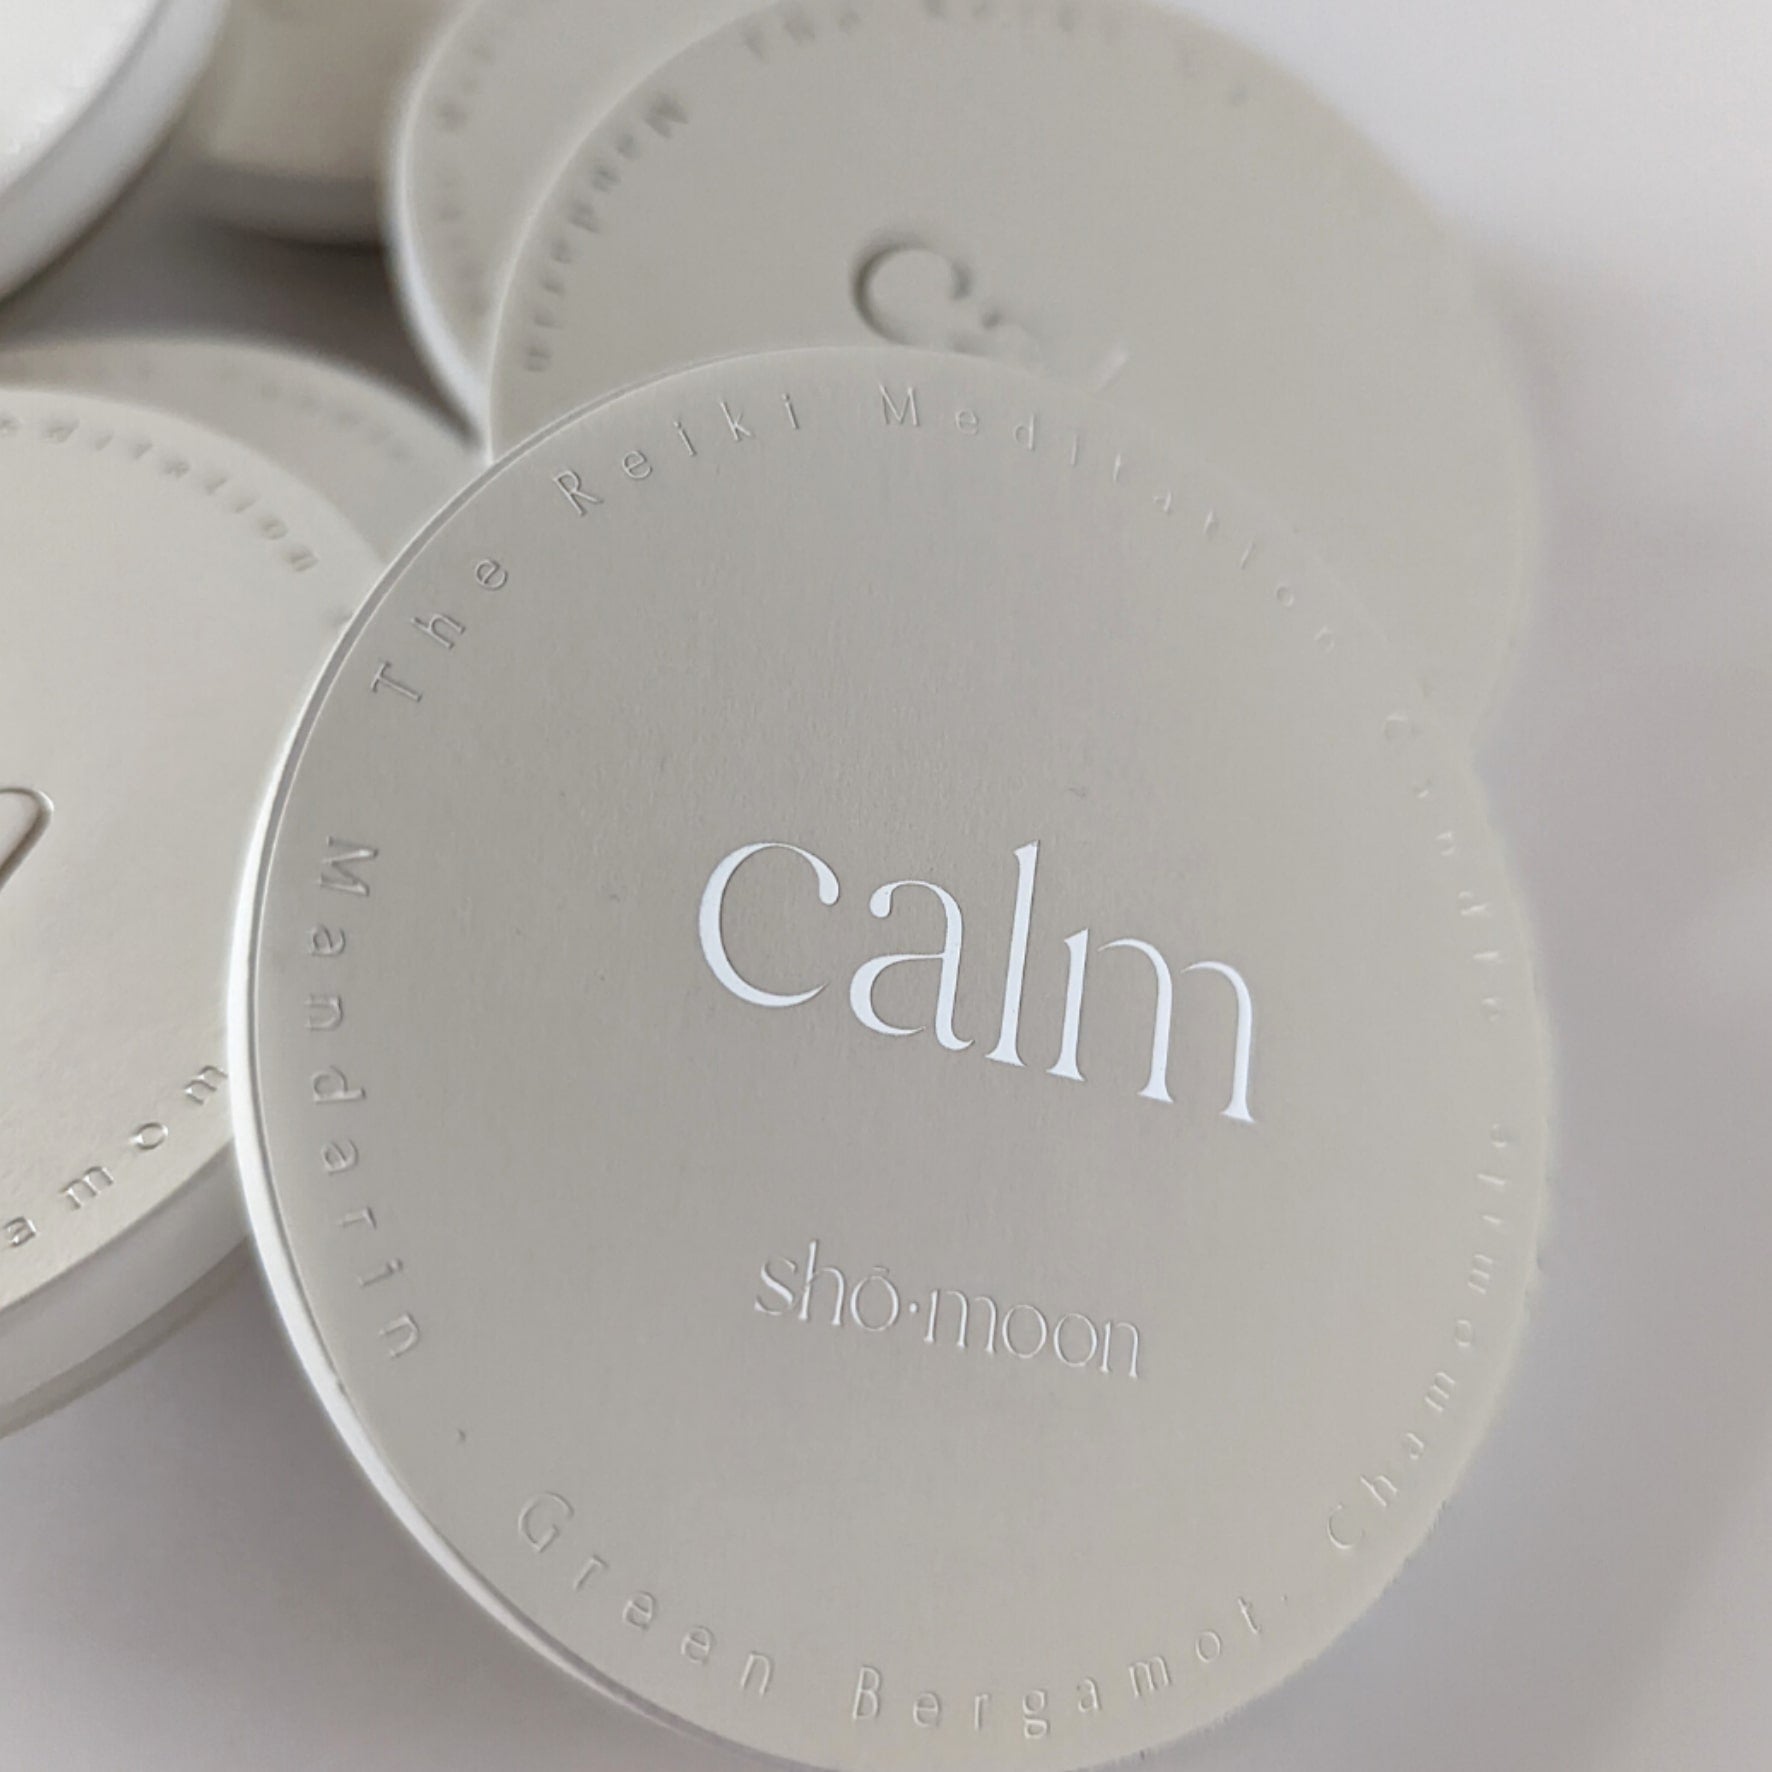 Shō-moon Calm Meditation Candle with pure essentials oils and clean burning and natural wax